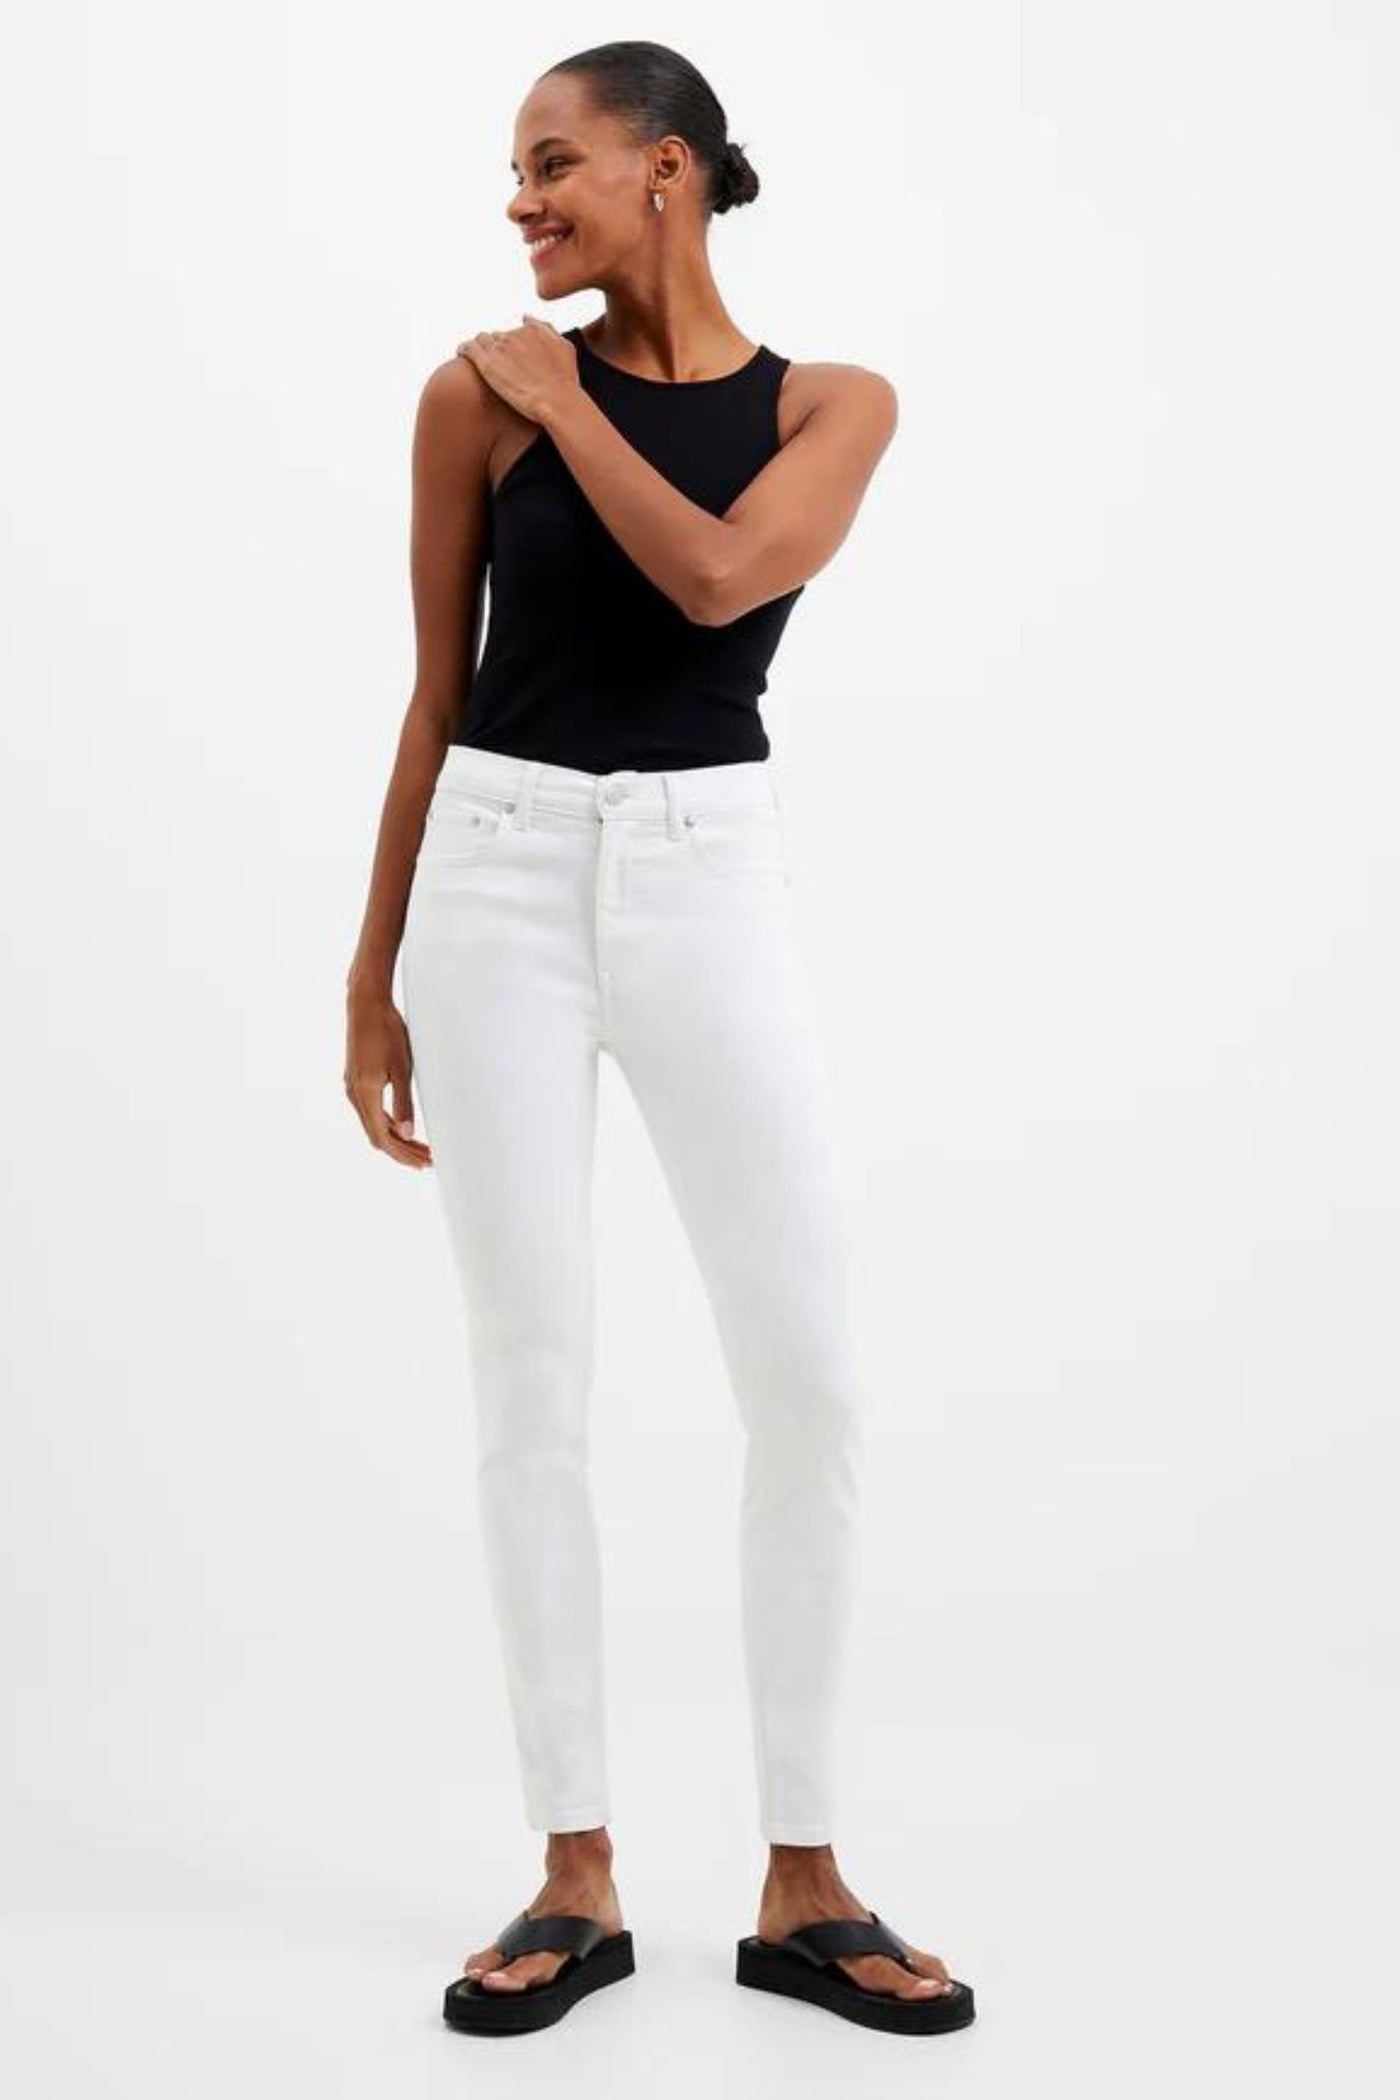 French Connection Rebound Response Skinny Jeans 30 Inch - White | Jezabel Boutique